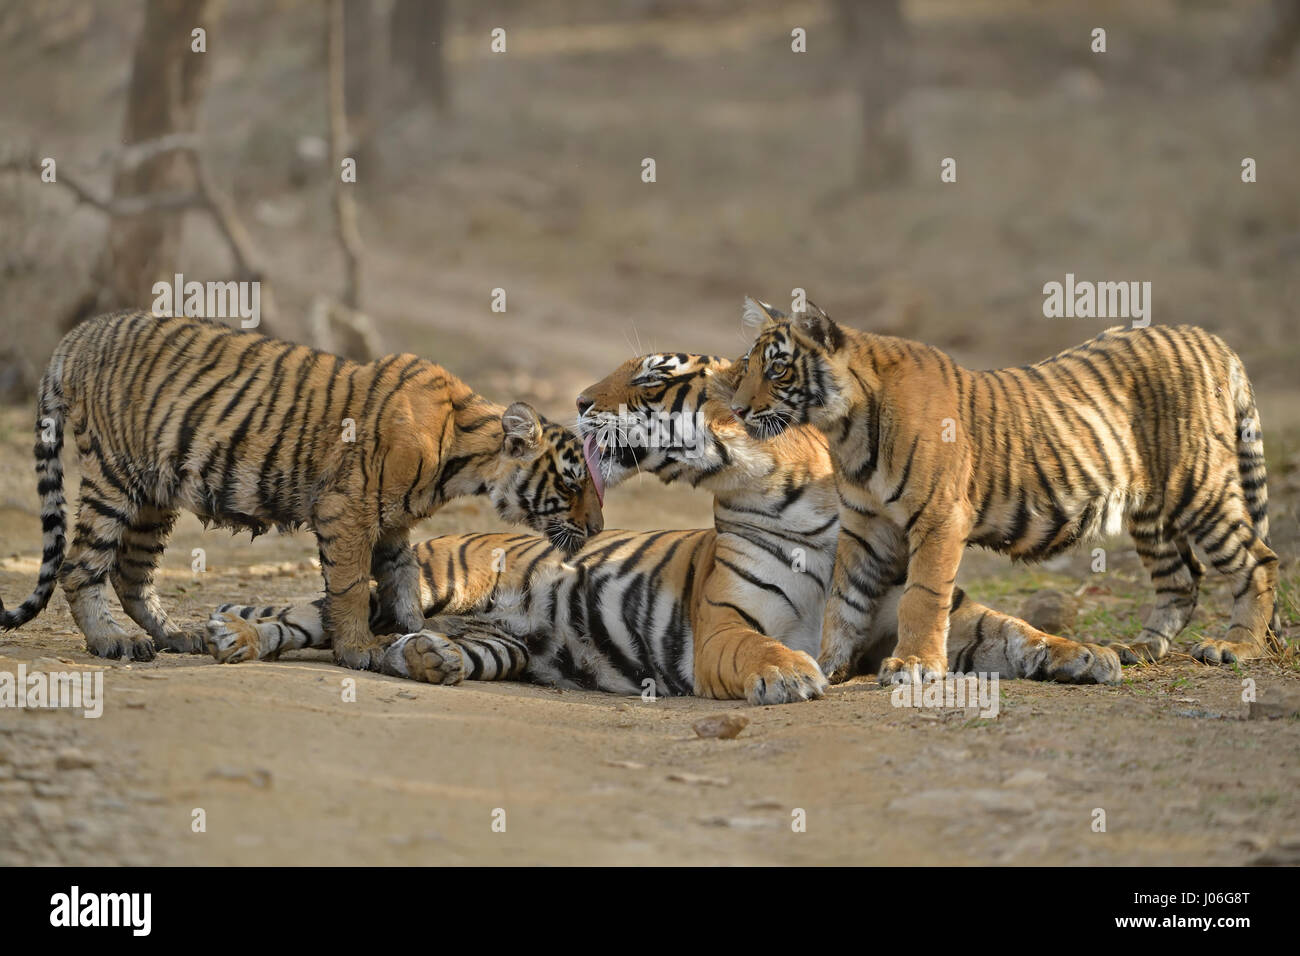 Bengal tiger, mother and cubs, sitting and nuzzling each other on a forest track in Ranthambhore tiger reserve, India Stock Photo